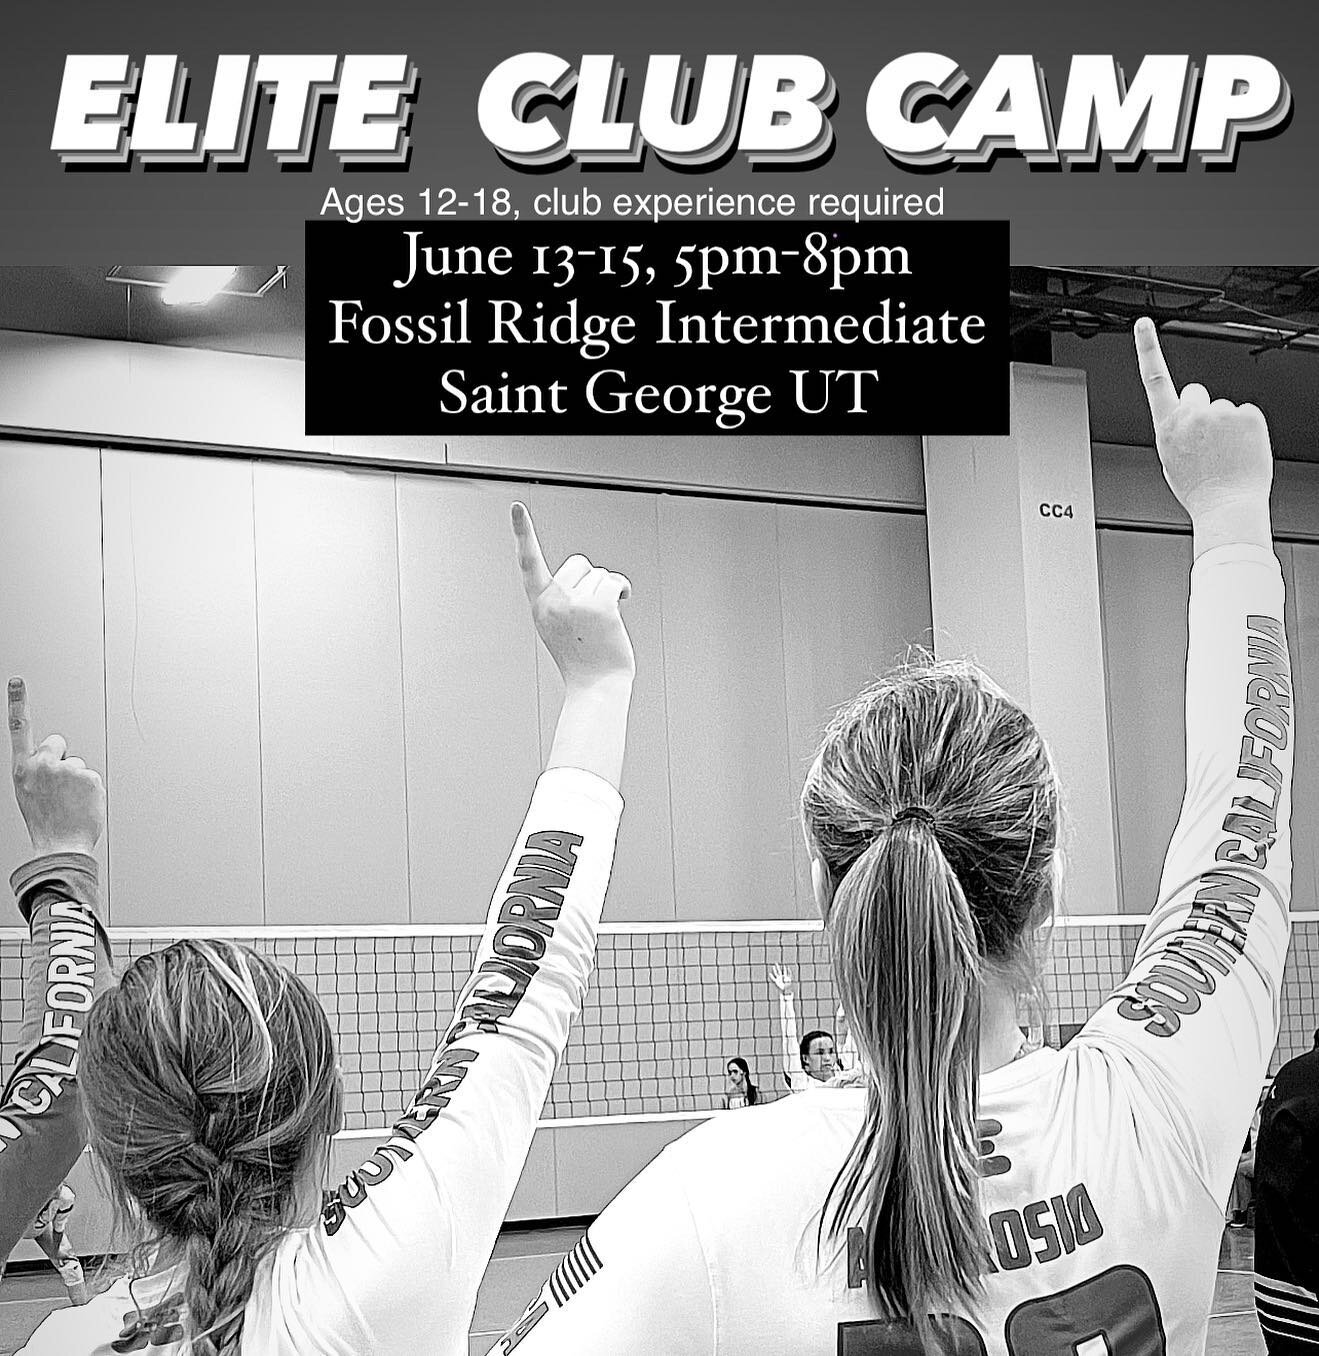 Registration is still open at www.beach-elite.com !!! Coach Rick will be running this one❤️❤️❤️👍🏻👍🏻